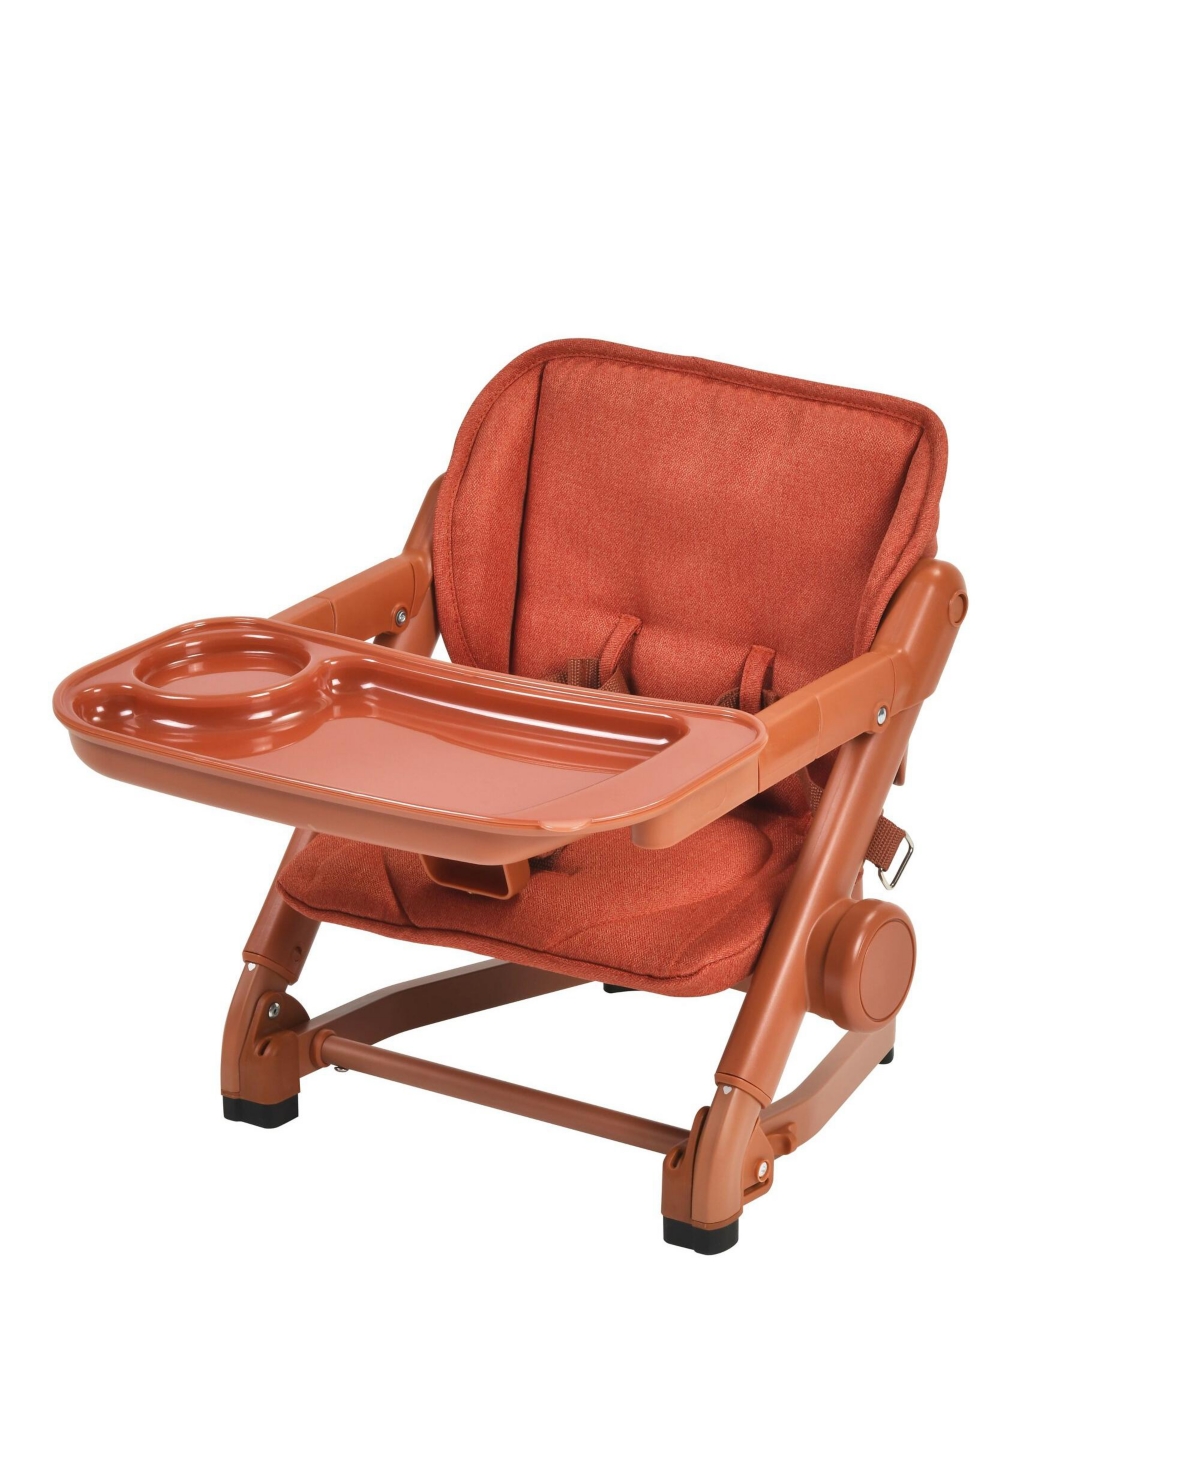 Unilove Feed Me 3-in-1 Dining Booster Seat In Pumpkin Orange